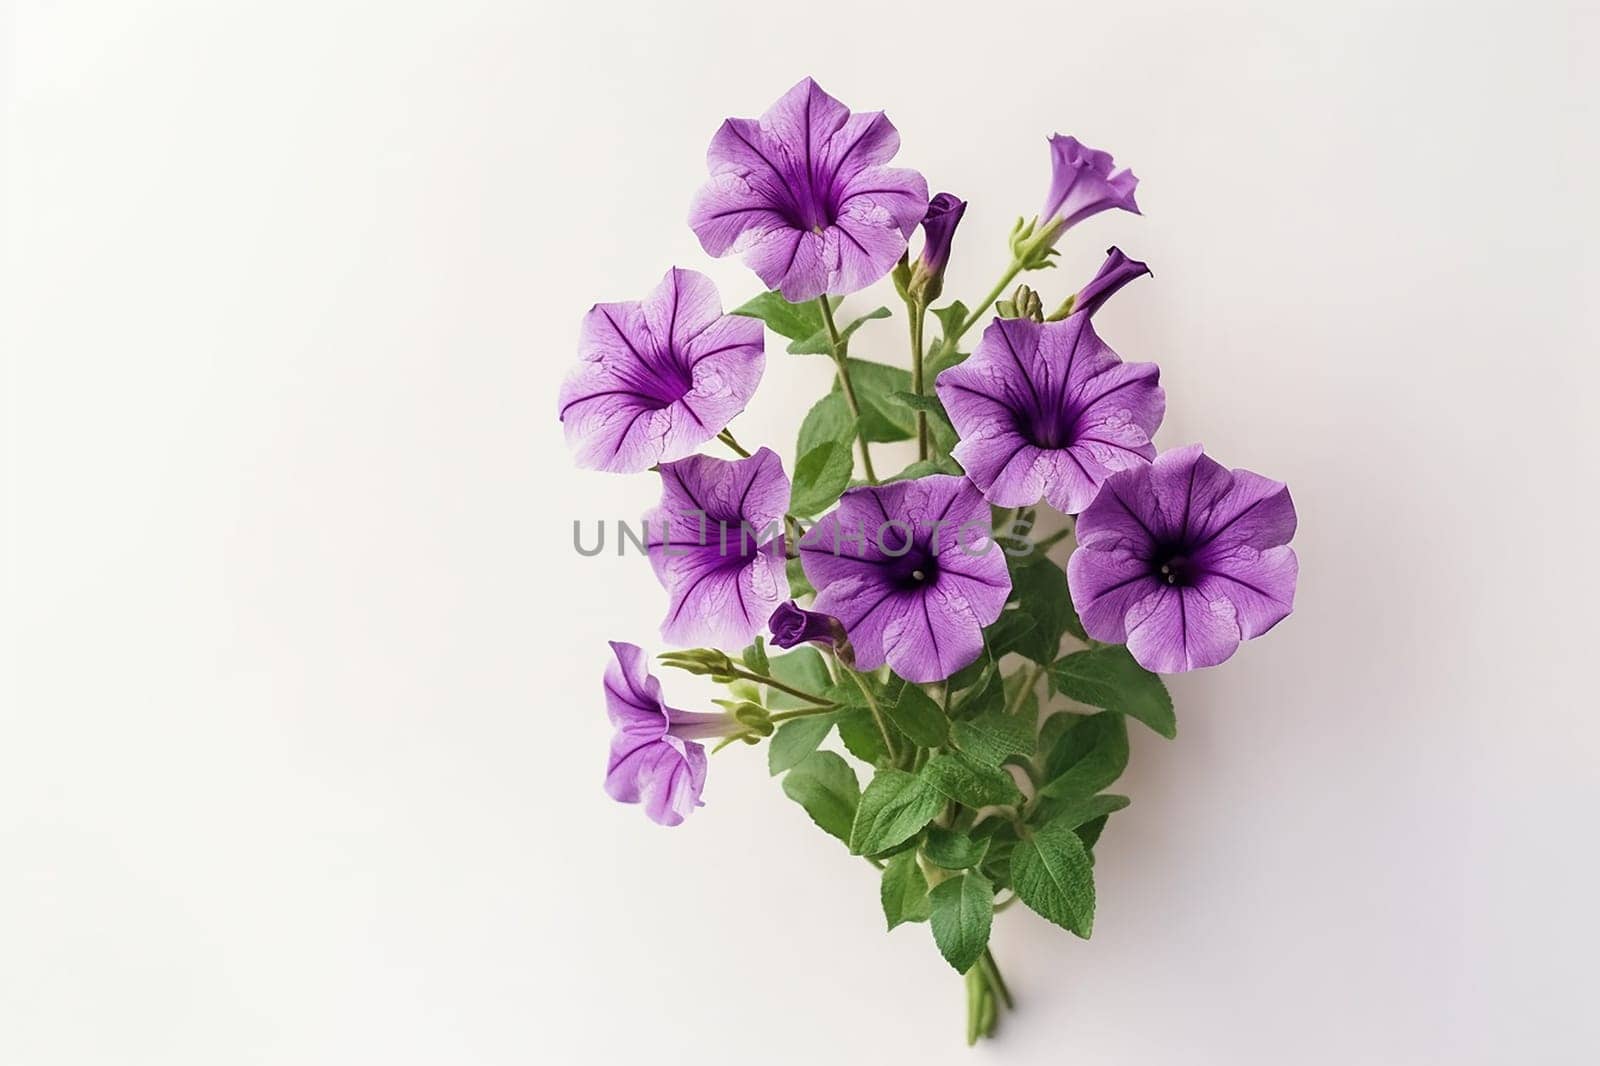 Purple petunia flowers with green leaves against a white background.